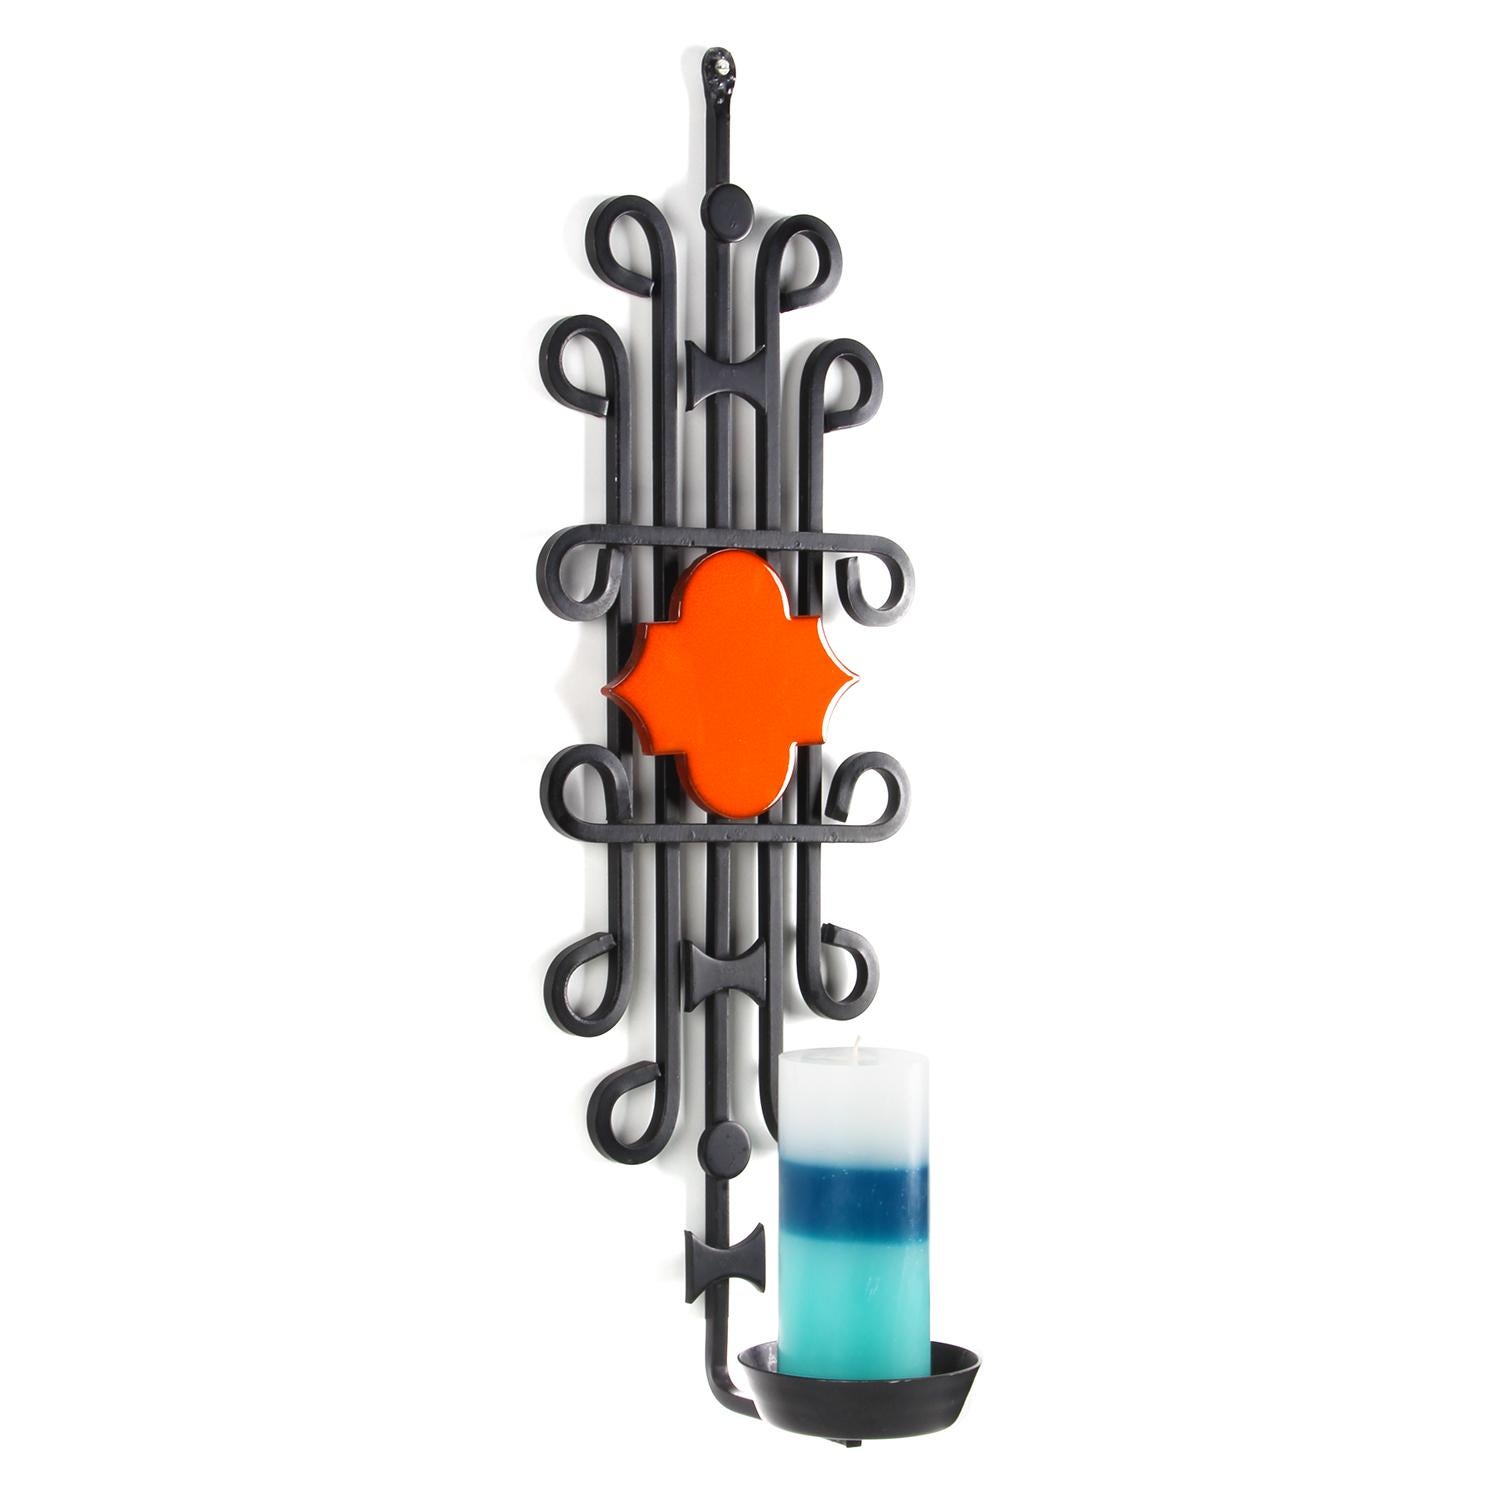 SCONCE wrought iron candle holder by Dantoft Kunstartikler, Denmark circa 1970s. Sculptural sconce in black wrought iron with an orange tile, in very good vintage condition.

A unique artisan sconce, made in curved black lacquered, welded wrought